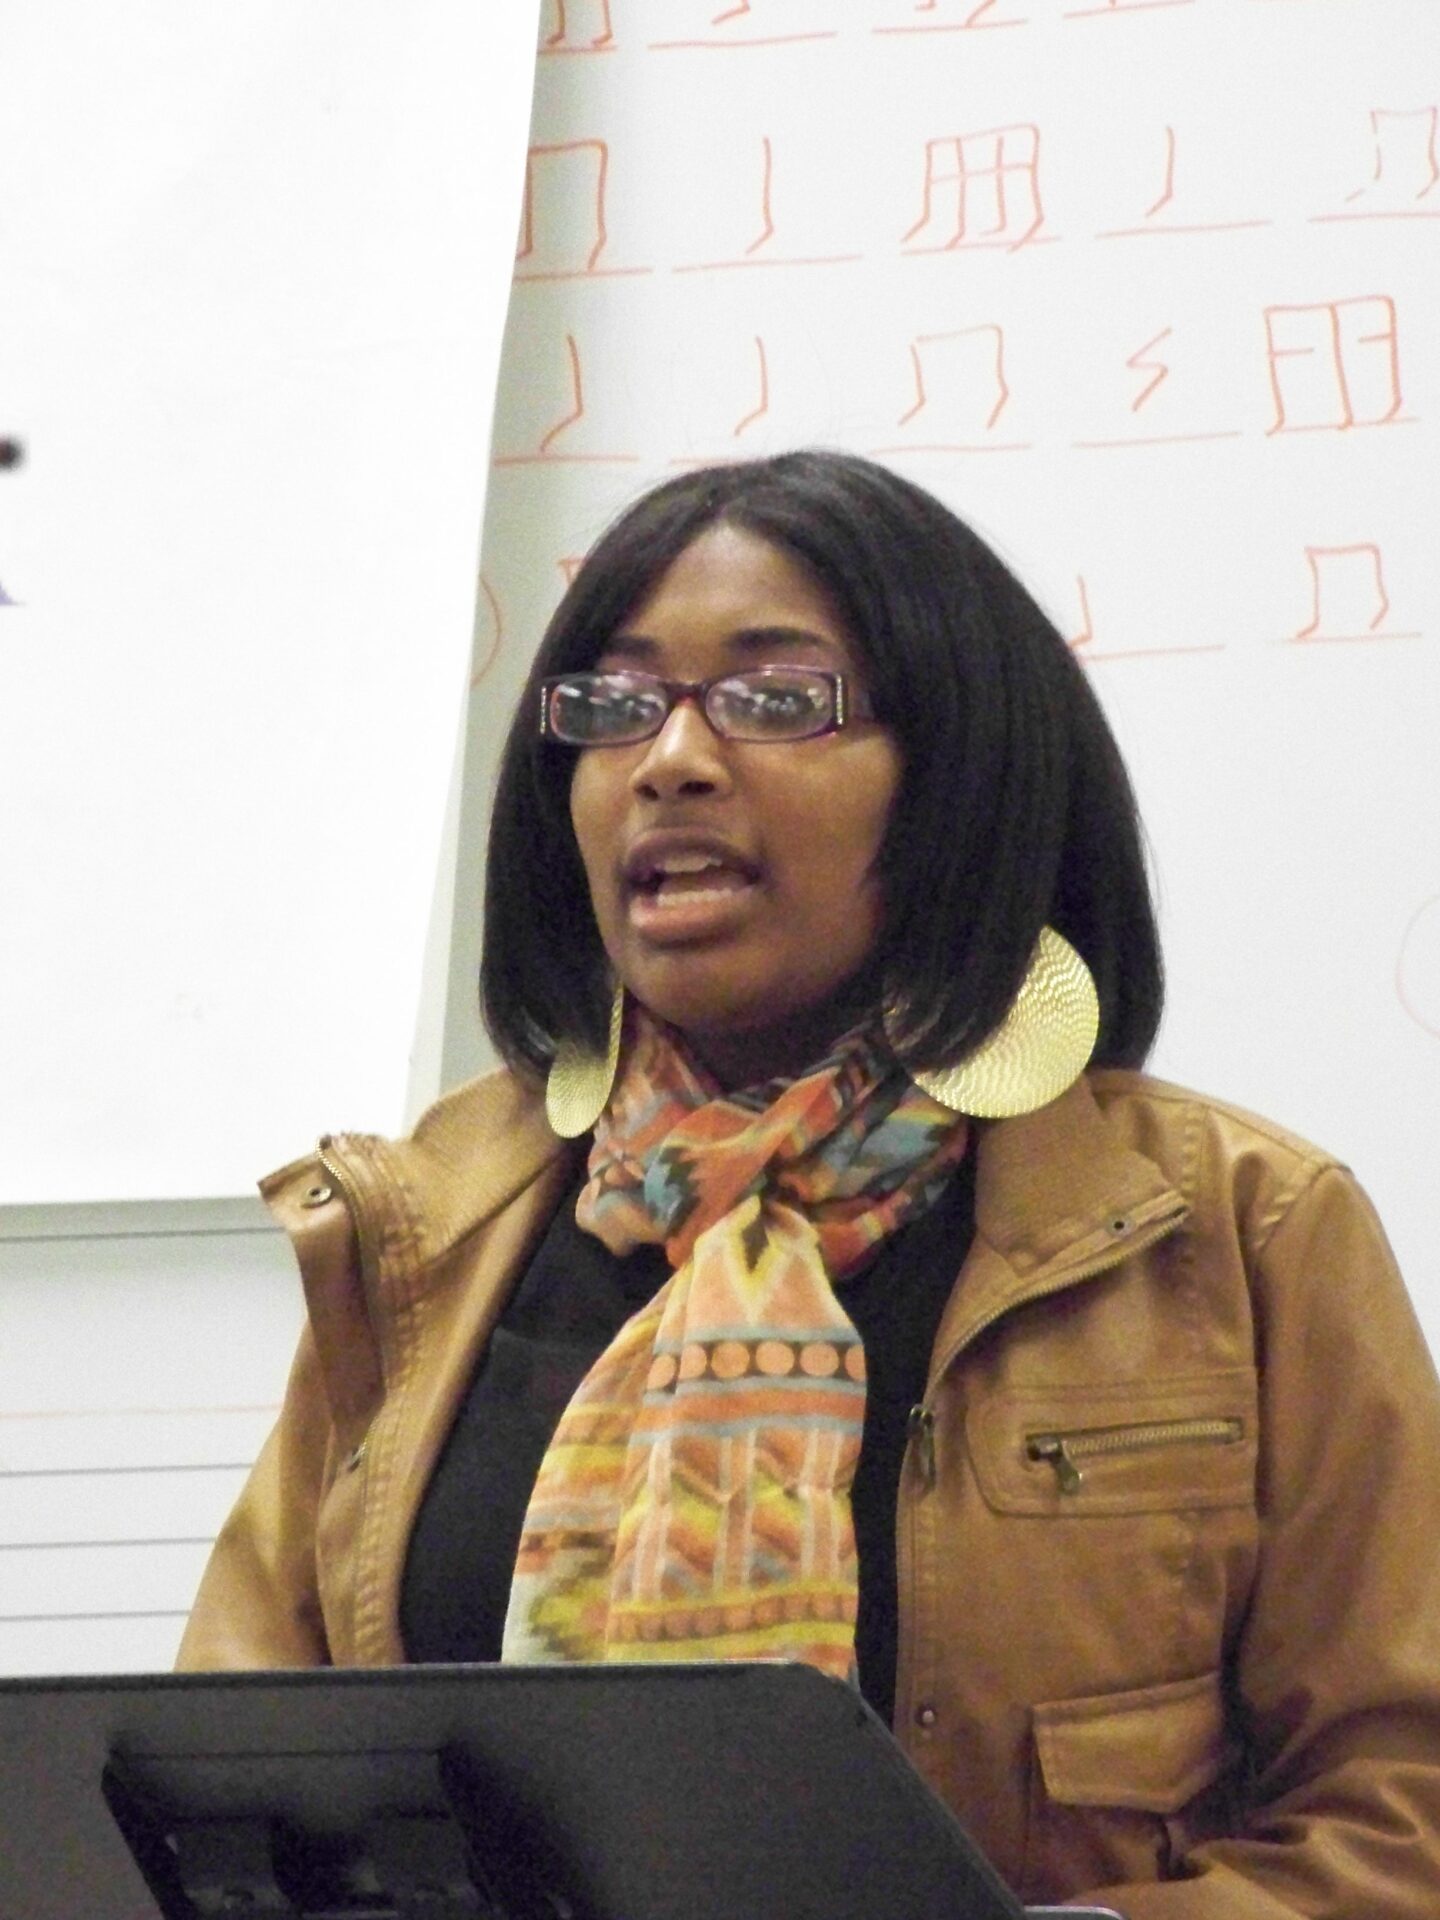 Ms. Pressley, a student at Sci Tech High, was one of the finalists in the Poetrty and Storytelling Contest for High School Students.